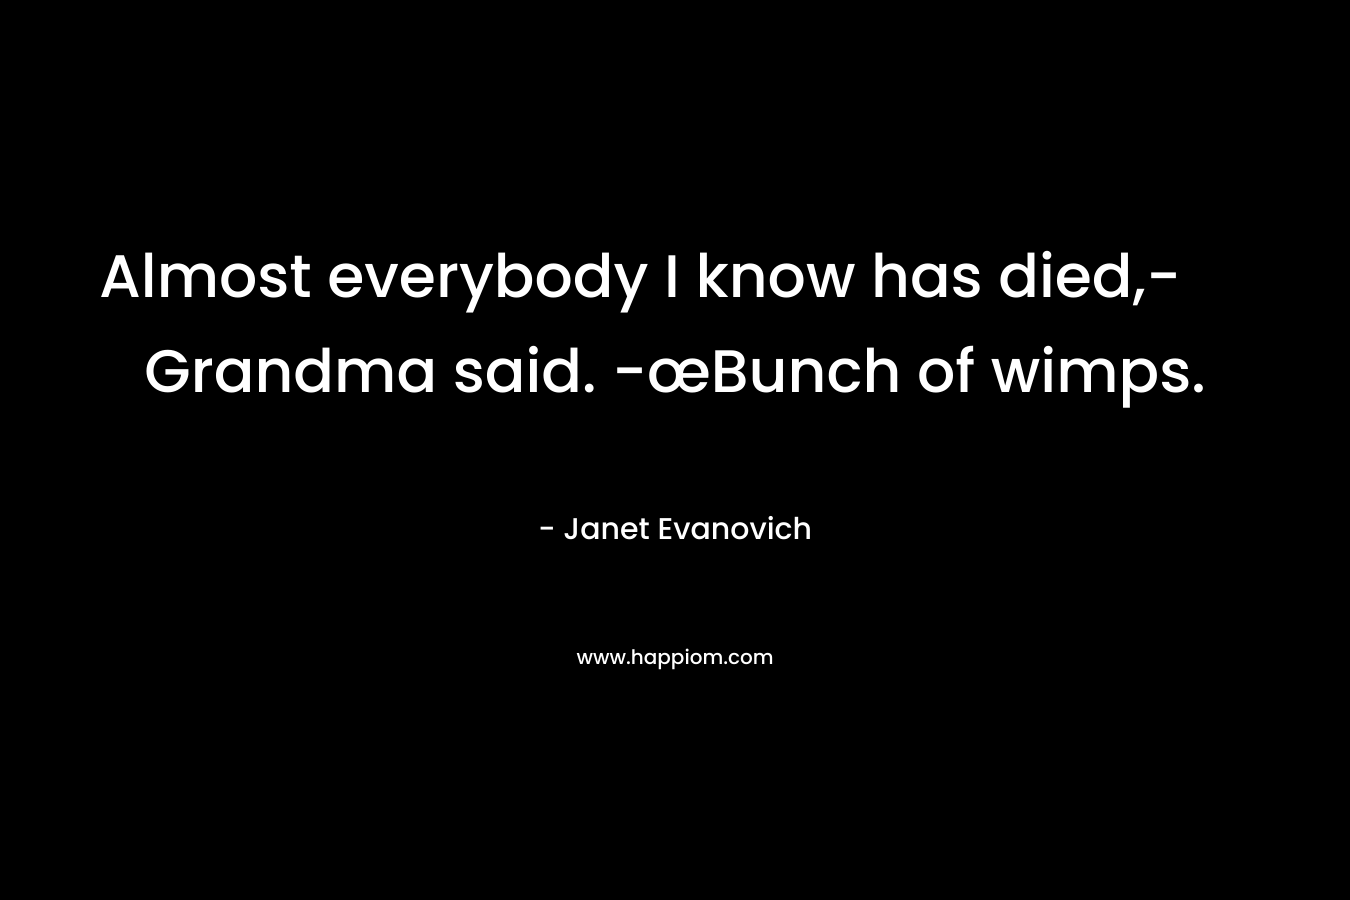 Almost everybody I know has died,- Grandma said. -œBunch of wimps.